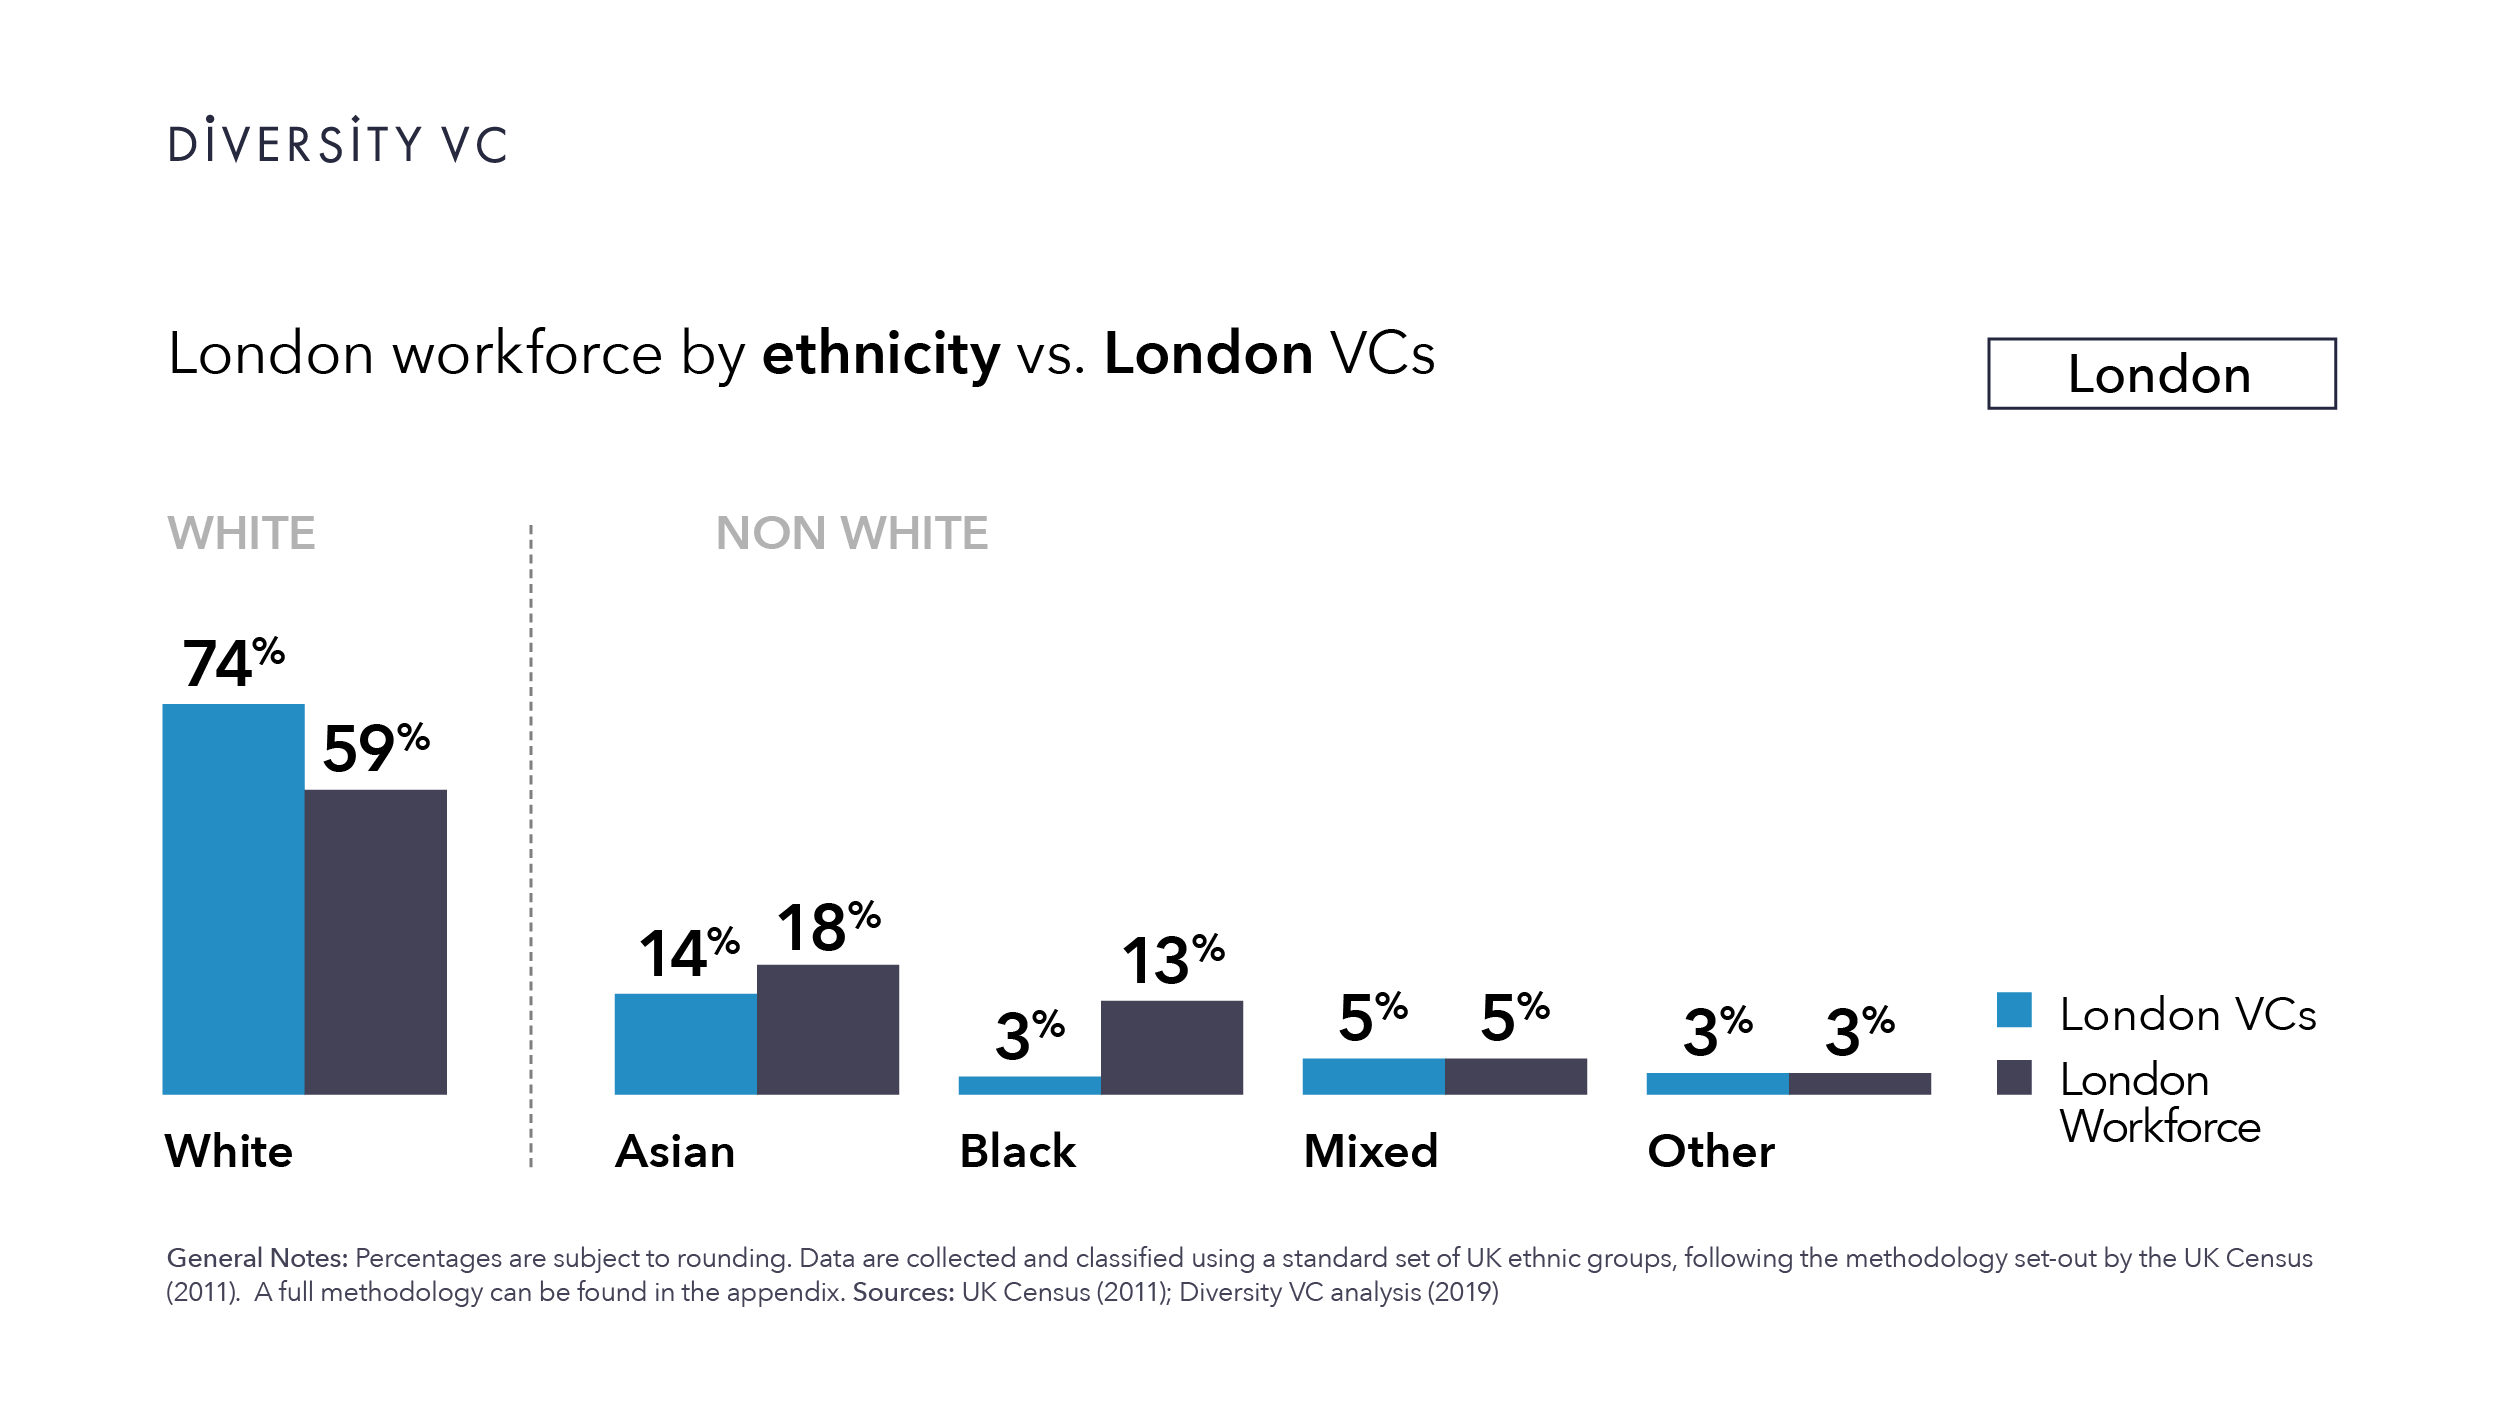 Graphic: London VCs are less diverse than the London workforce as a whole